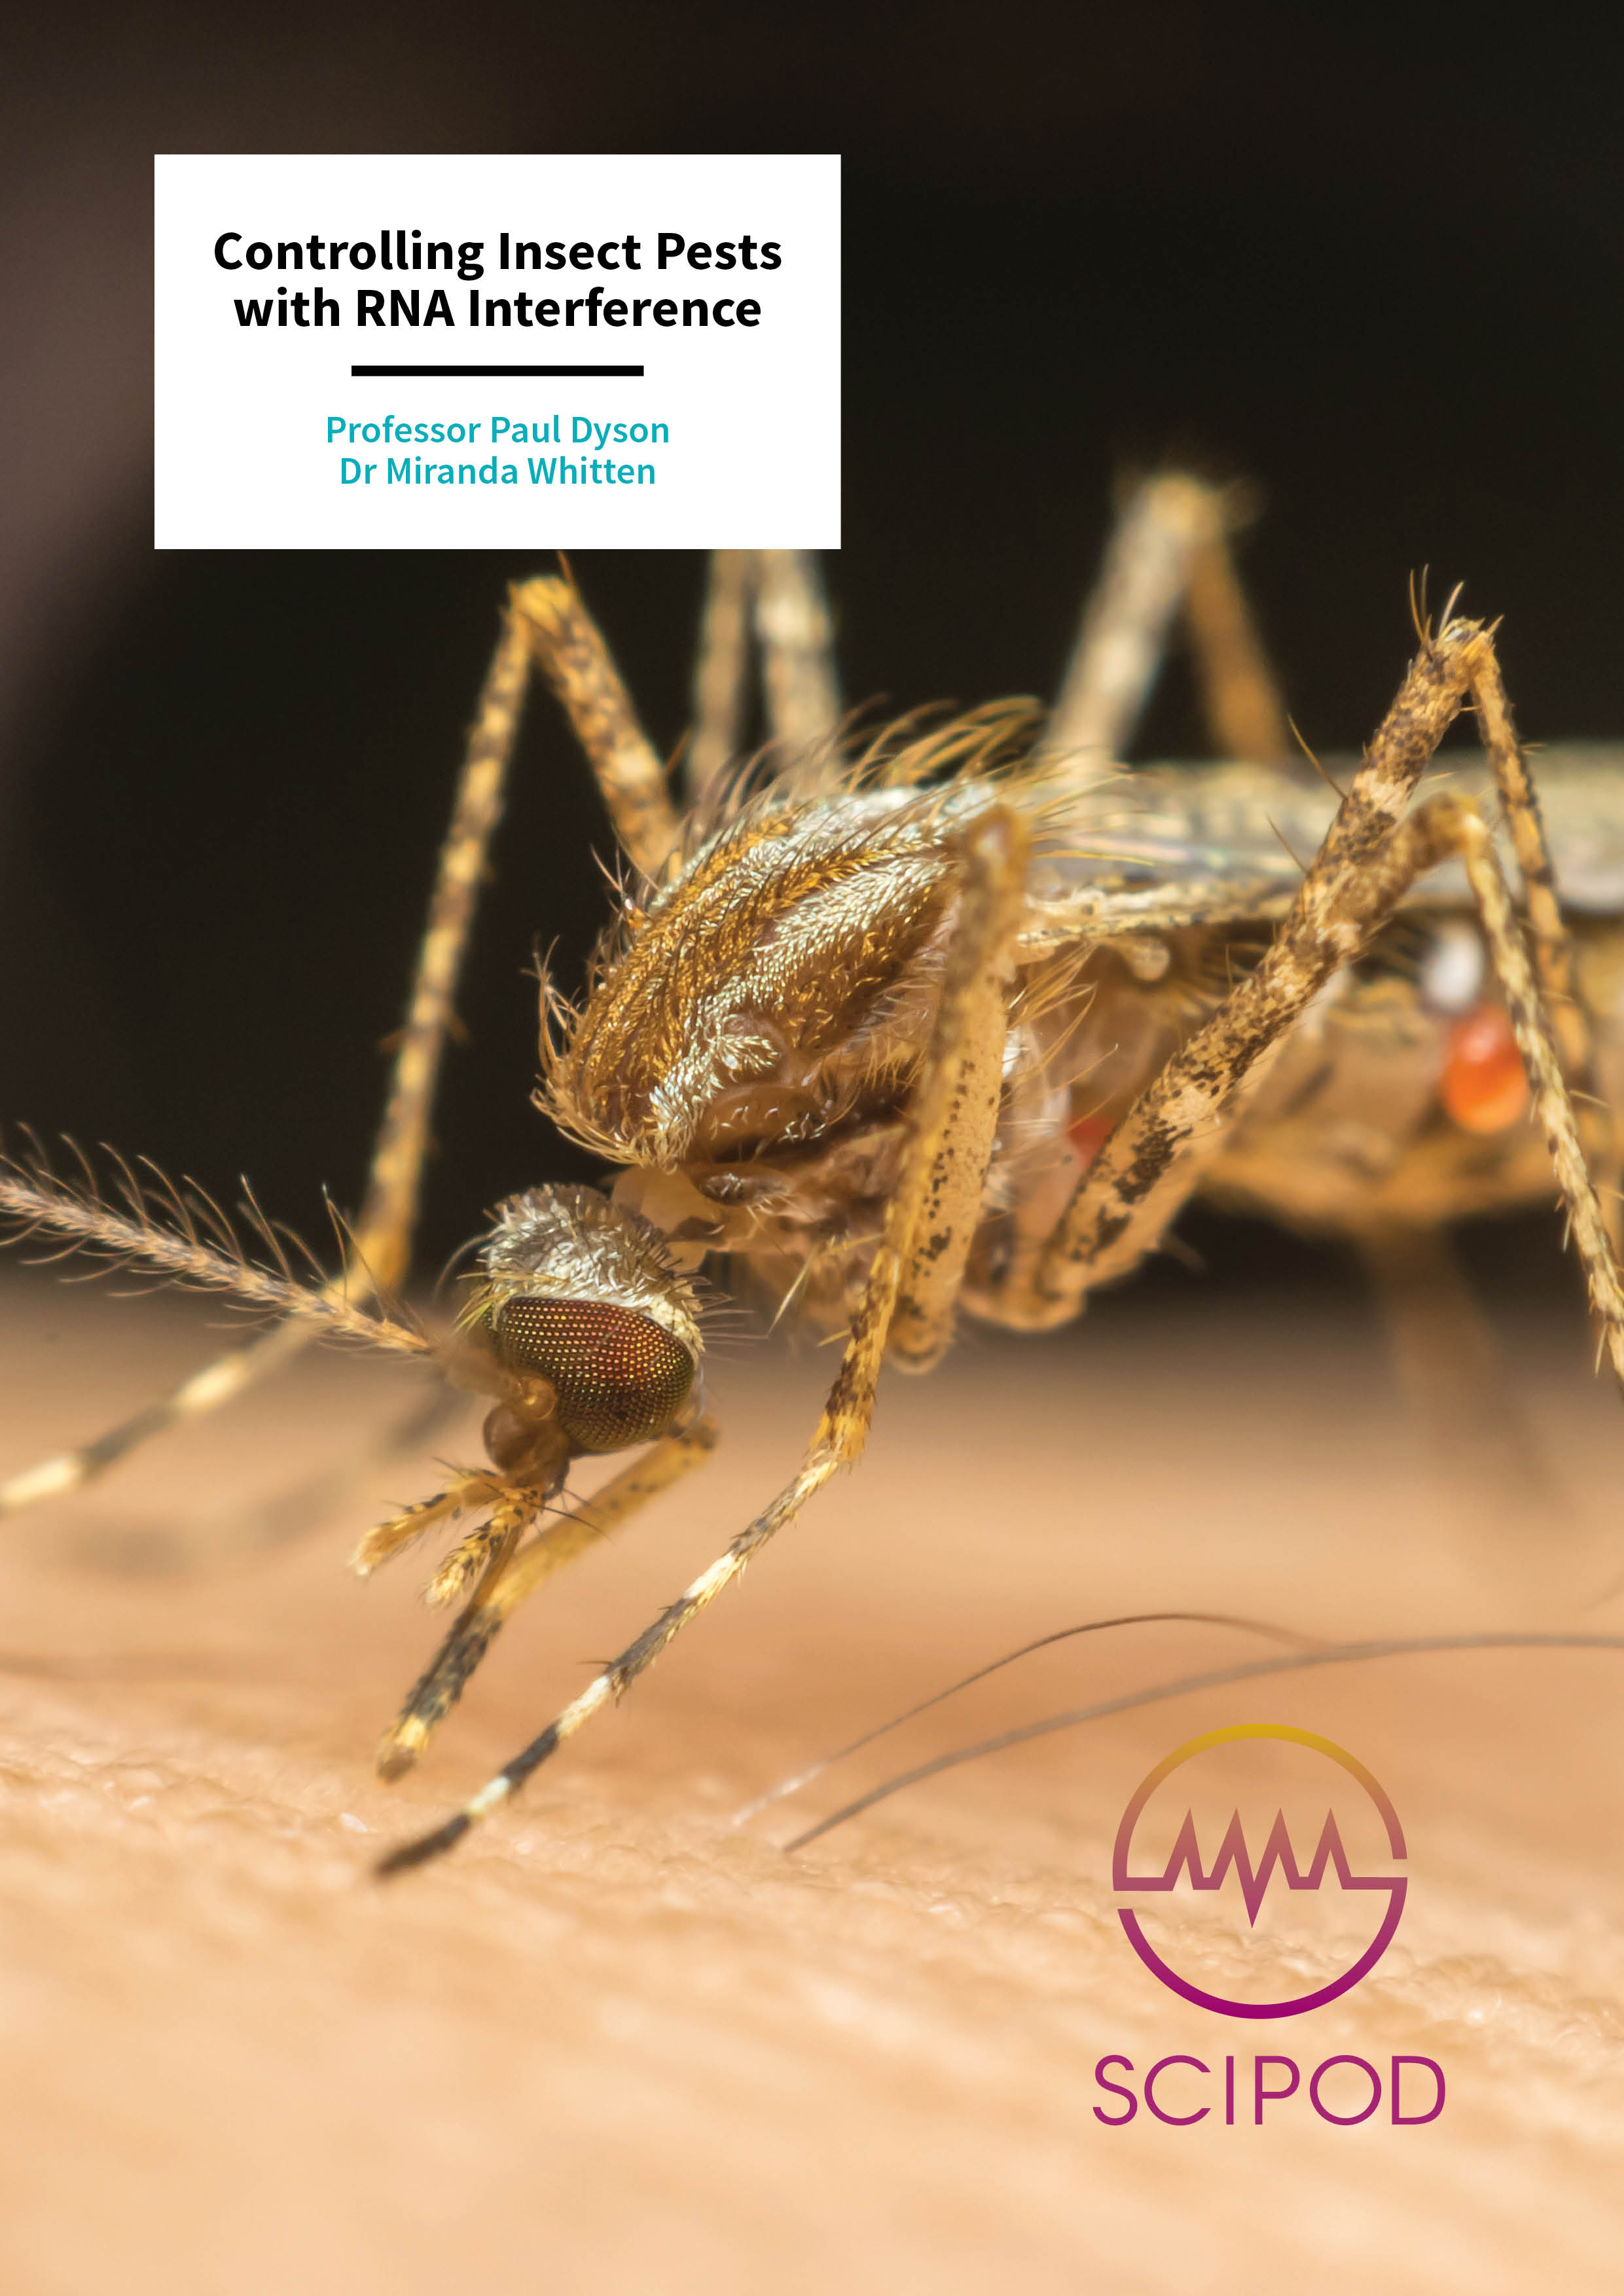 Controlling Insect Pests with RNA Interference – Professor Paul Dyson and Dr Miranda Whitten, Swansea University